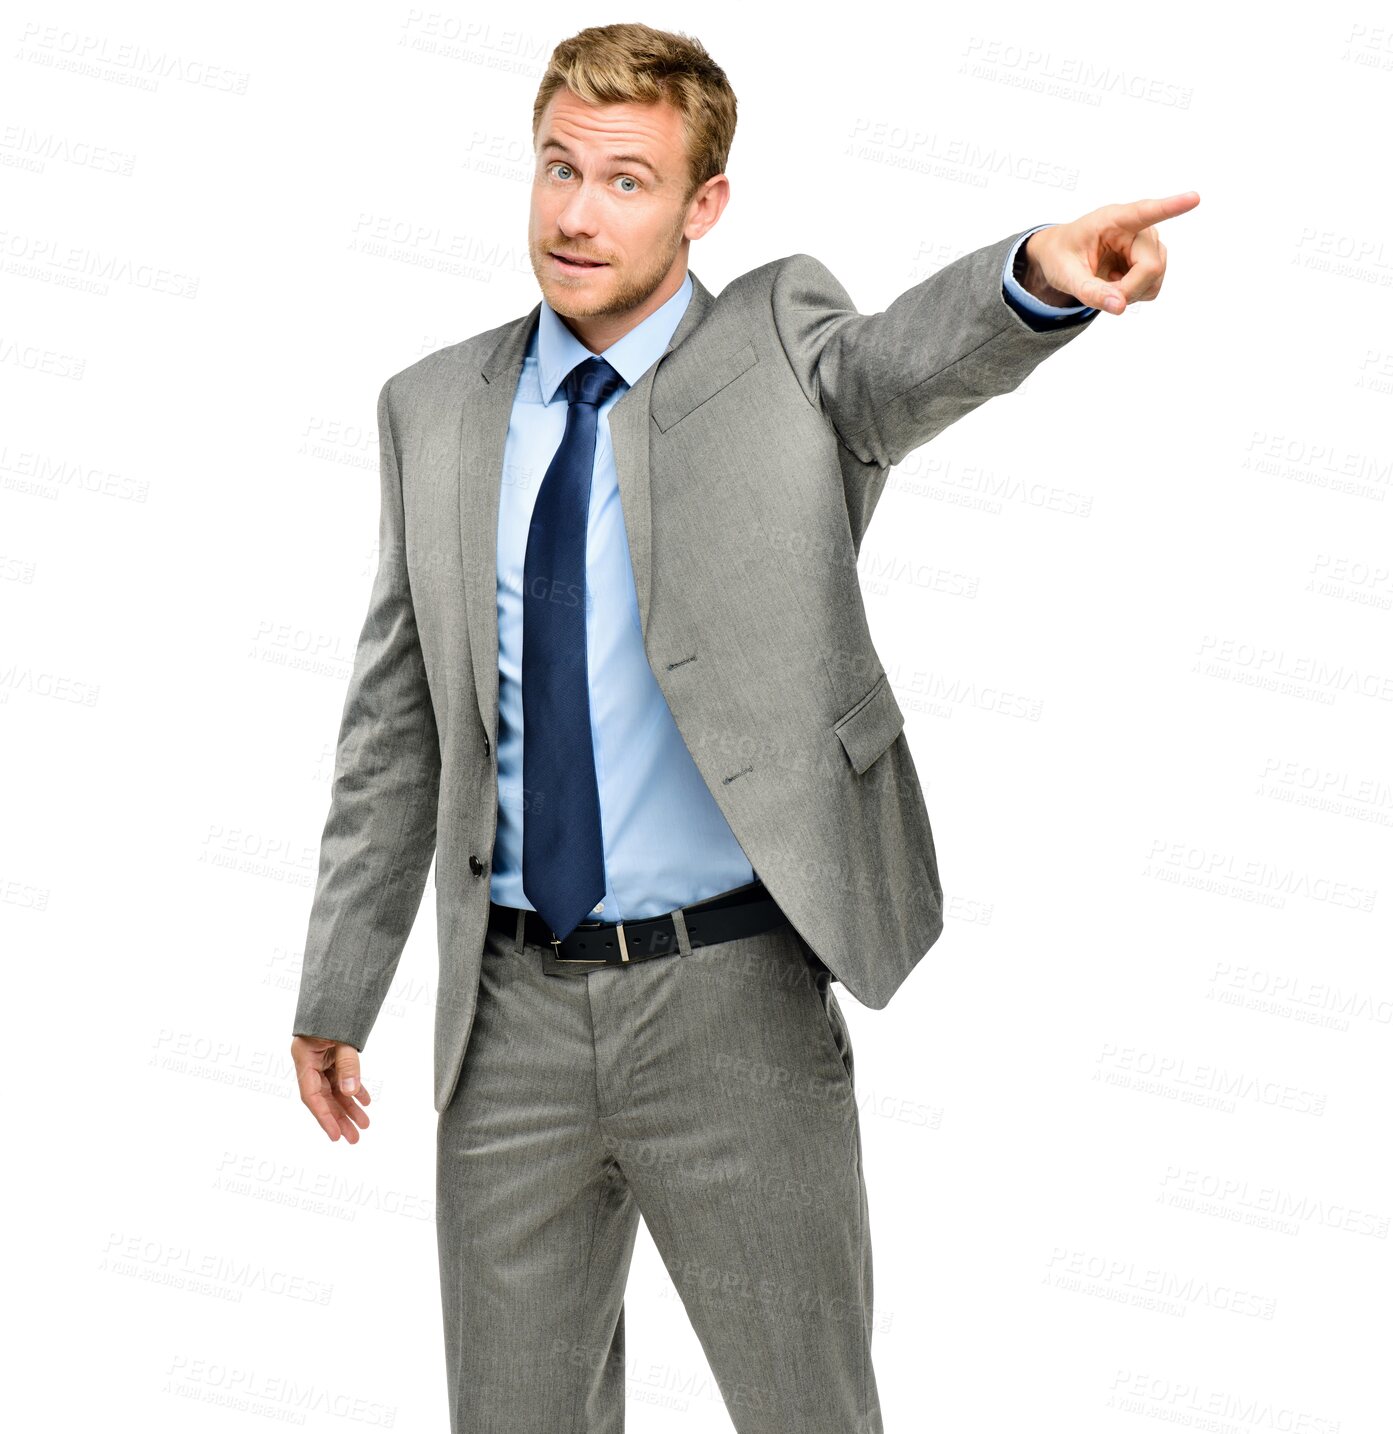 Buy stock photo Portrait of frustrated businessman pointing, isolated on transparent png background and anger with startup problem. Corporate fight, conflict and professional ceo man in suit with angry hand gesture.